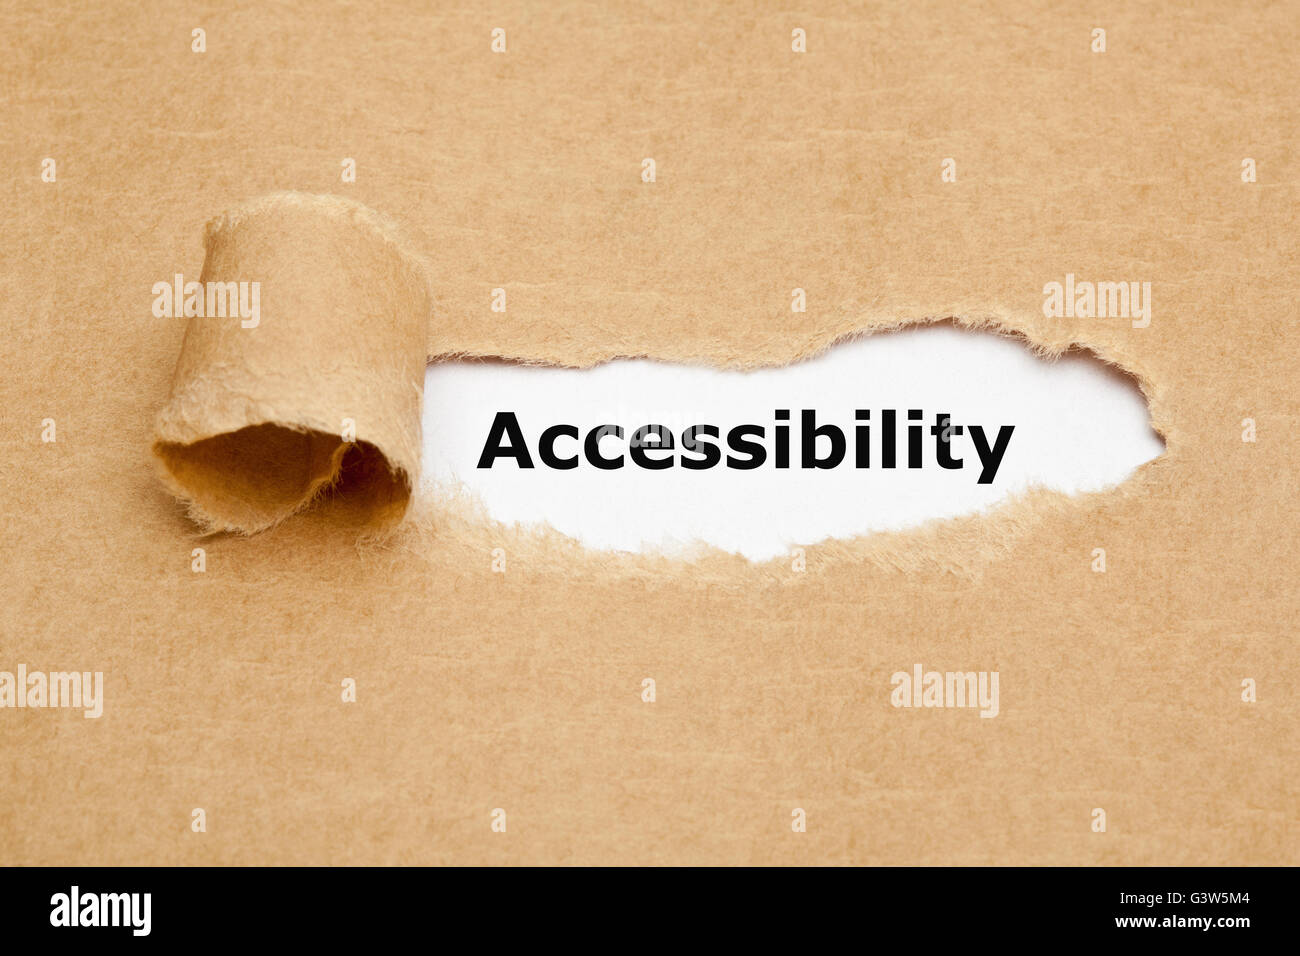 The word Accessibility appearing behind torn brown paper. Stock Photo